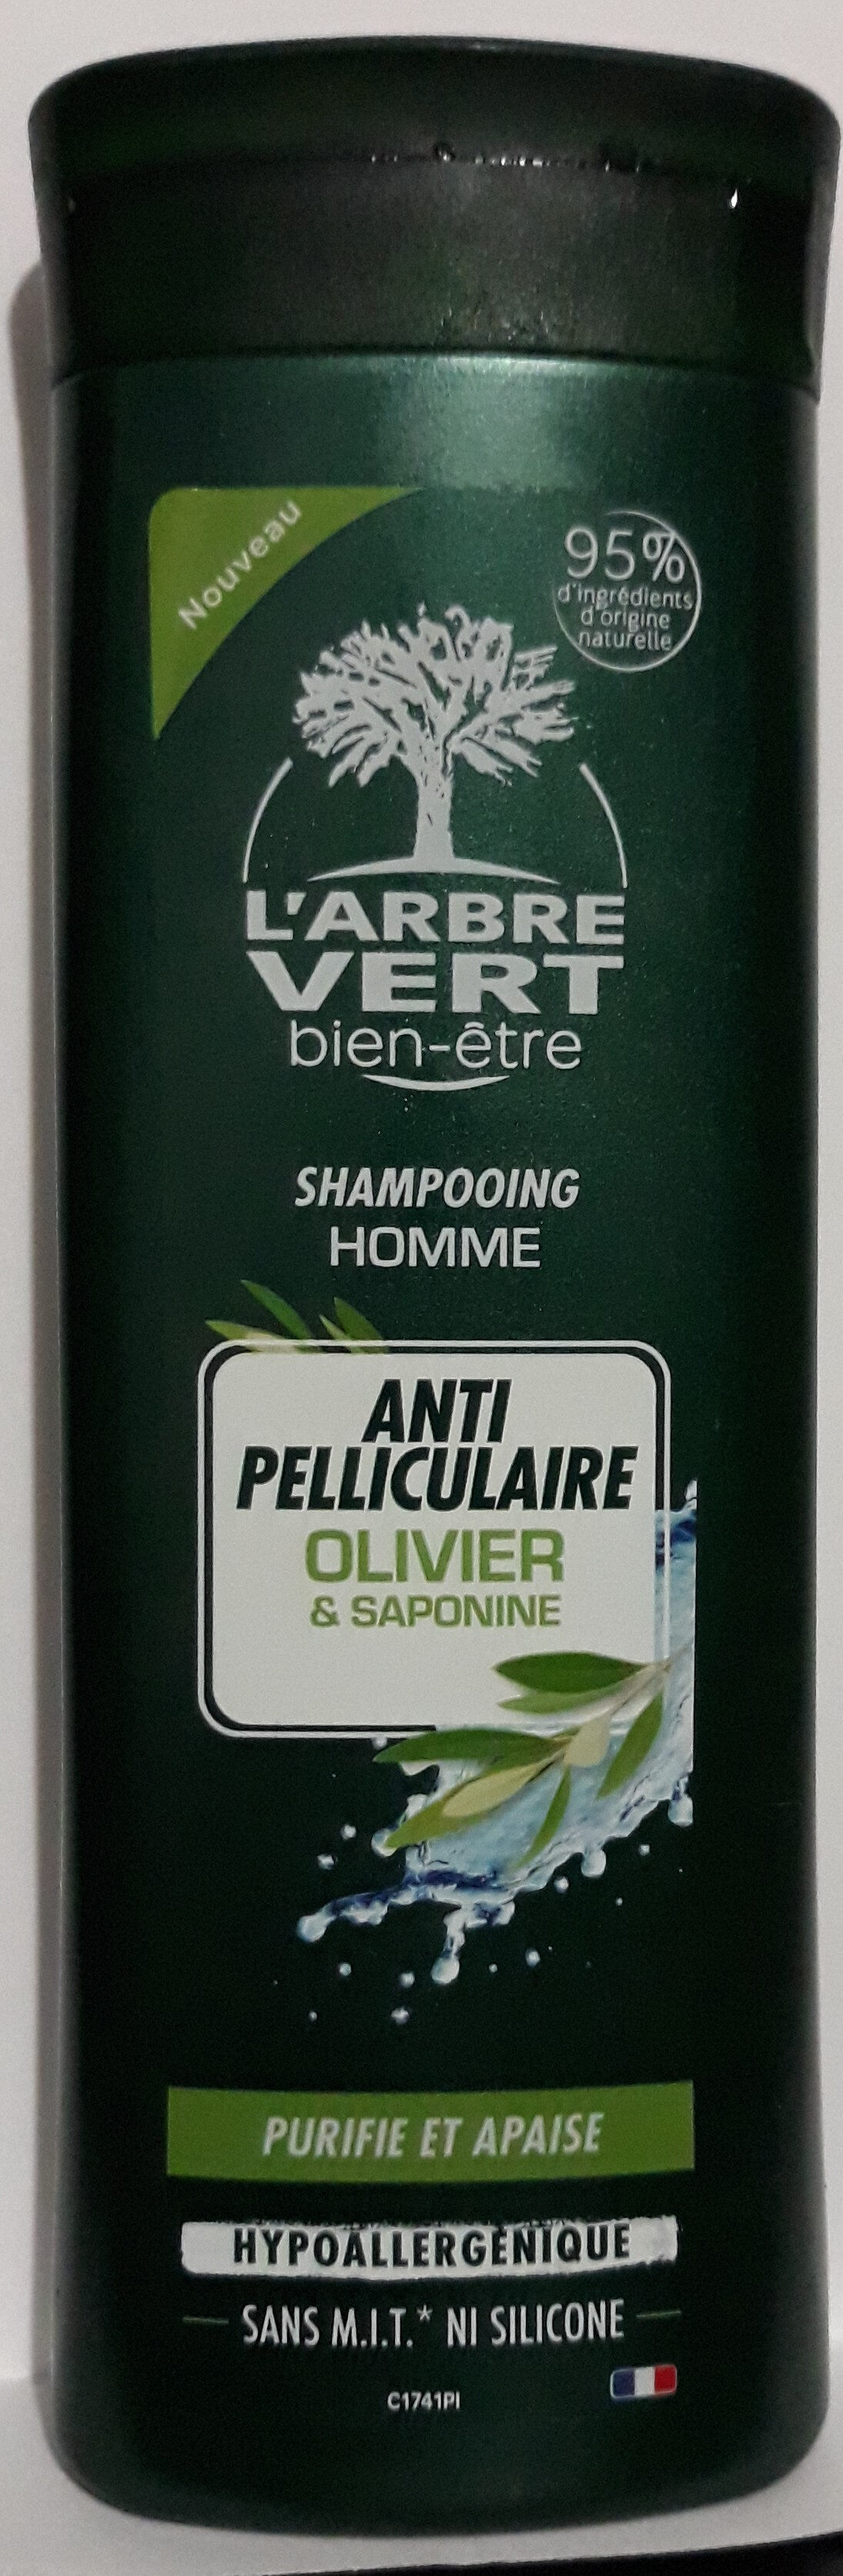 shampooing homme anti pelliculaire olivier & saponine - 製品 - fr